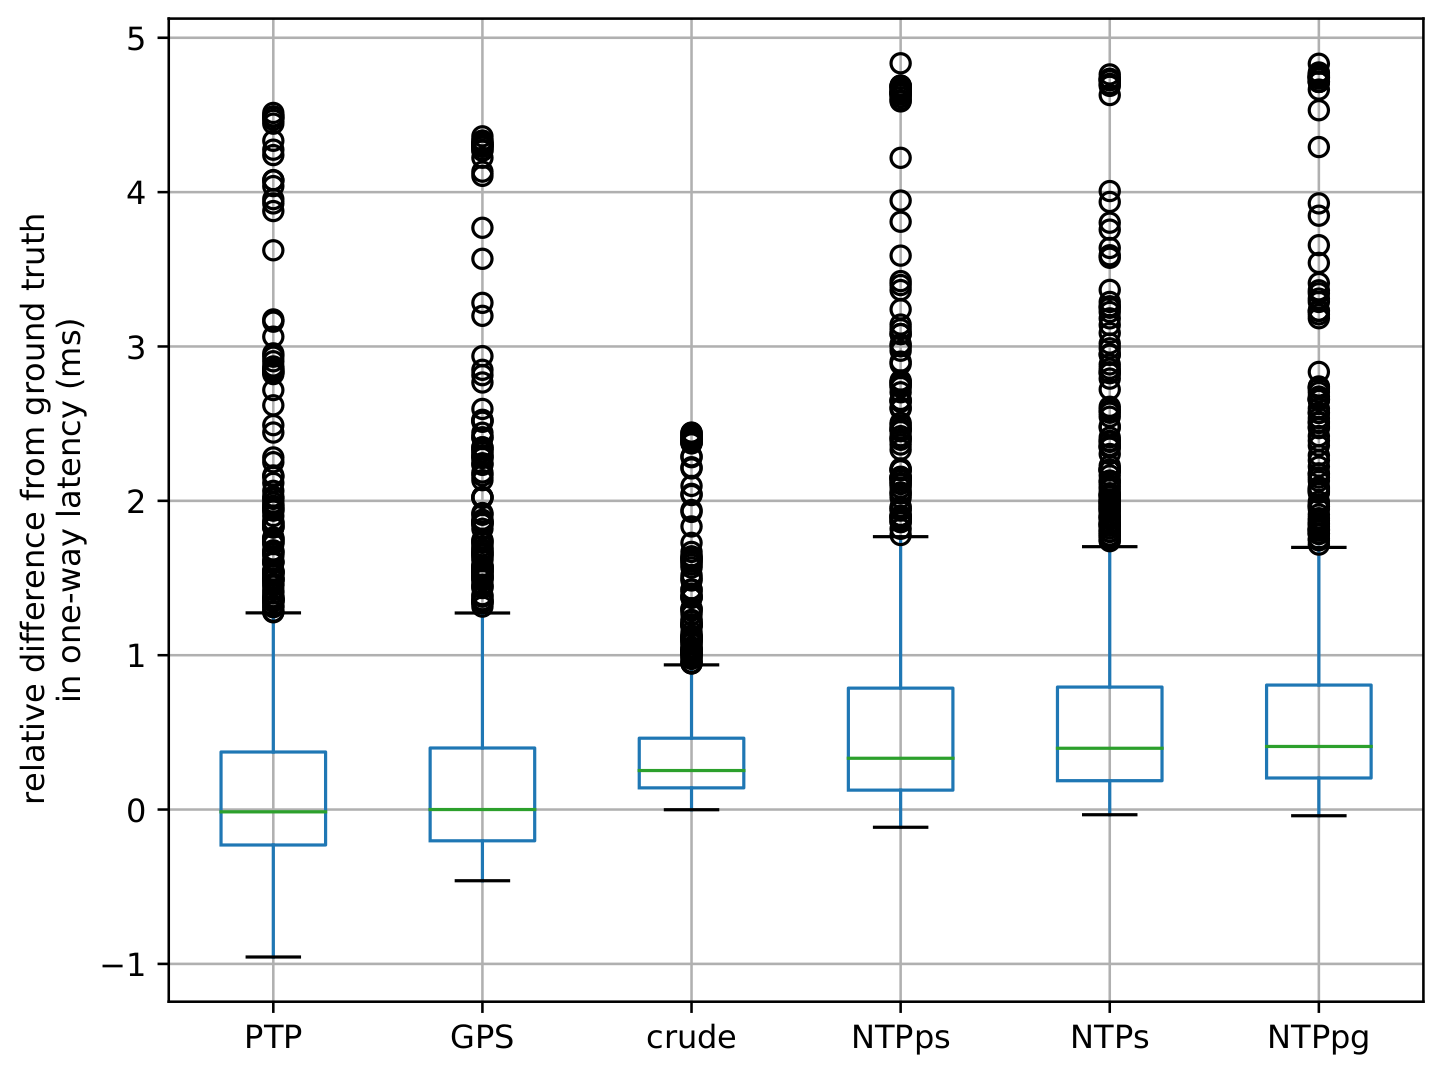 Boxplots showing Precise Time Protocol (PTP) with least relative difference from GPS ground truth in one-way latency when subject to asymmetric jitter